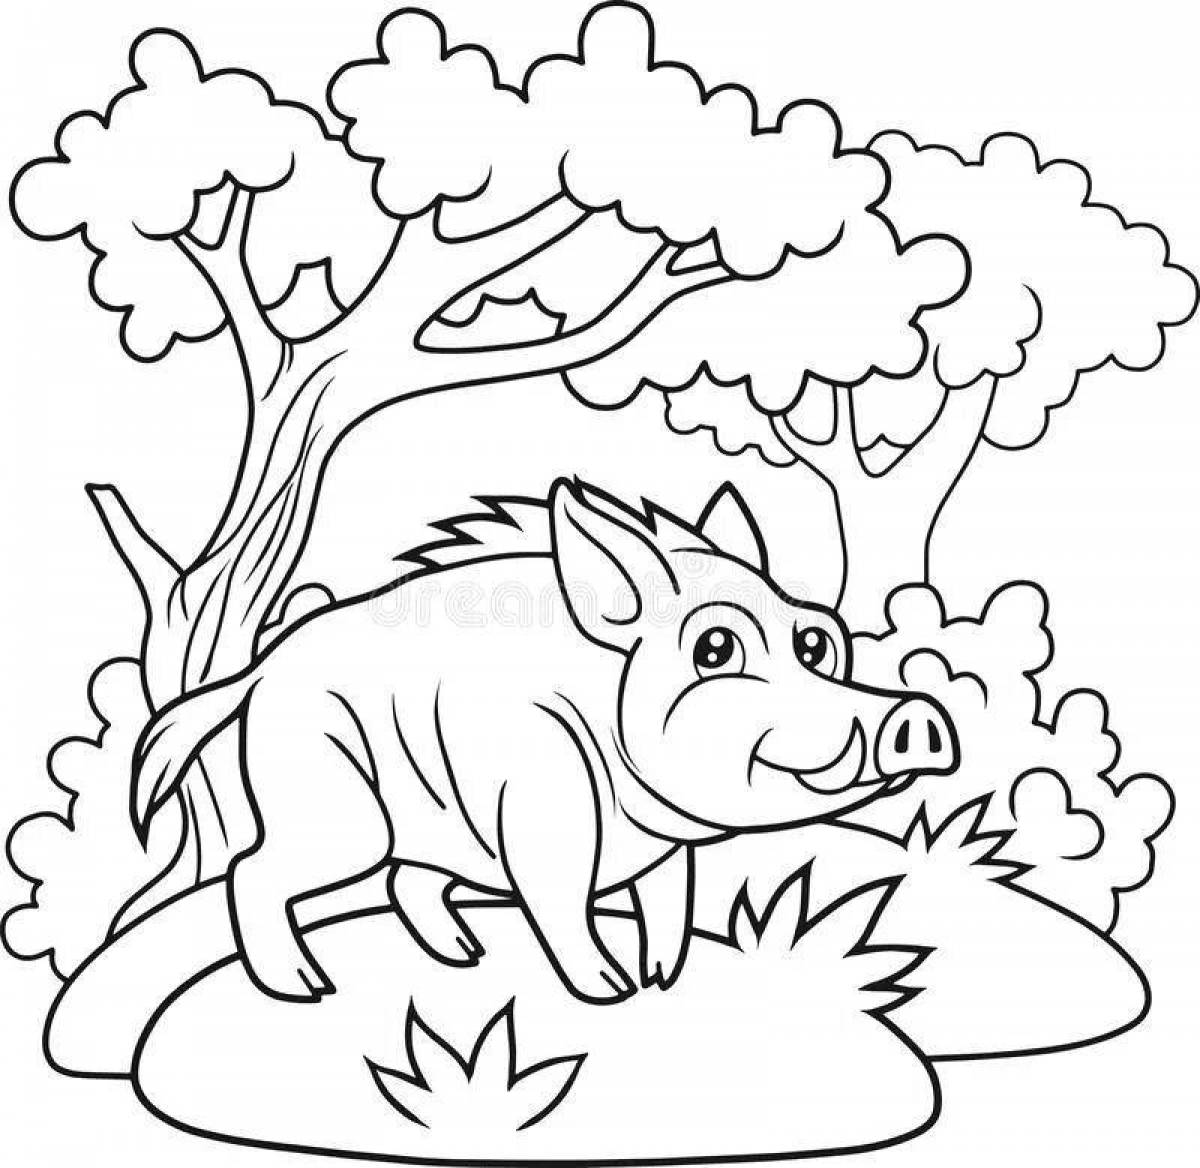 Cute boar coloring pages for kids